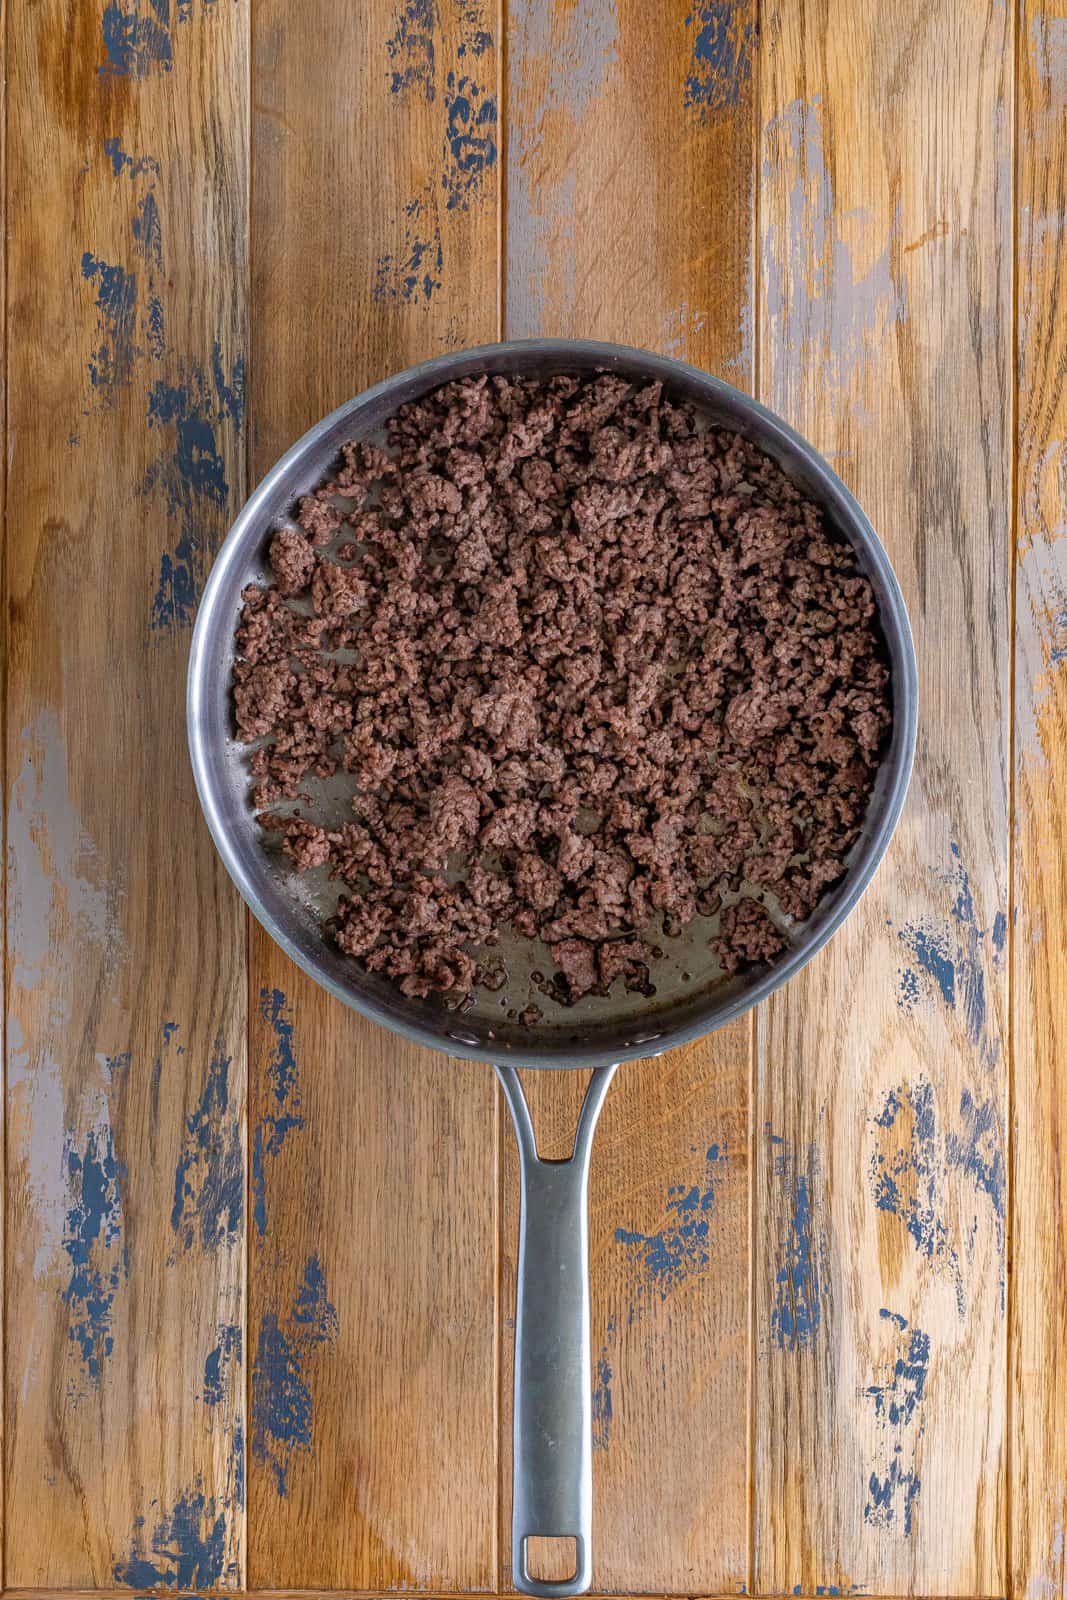 browning and crumbling ground beef in a large skillet.